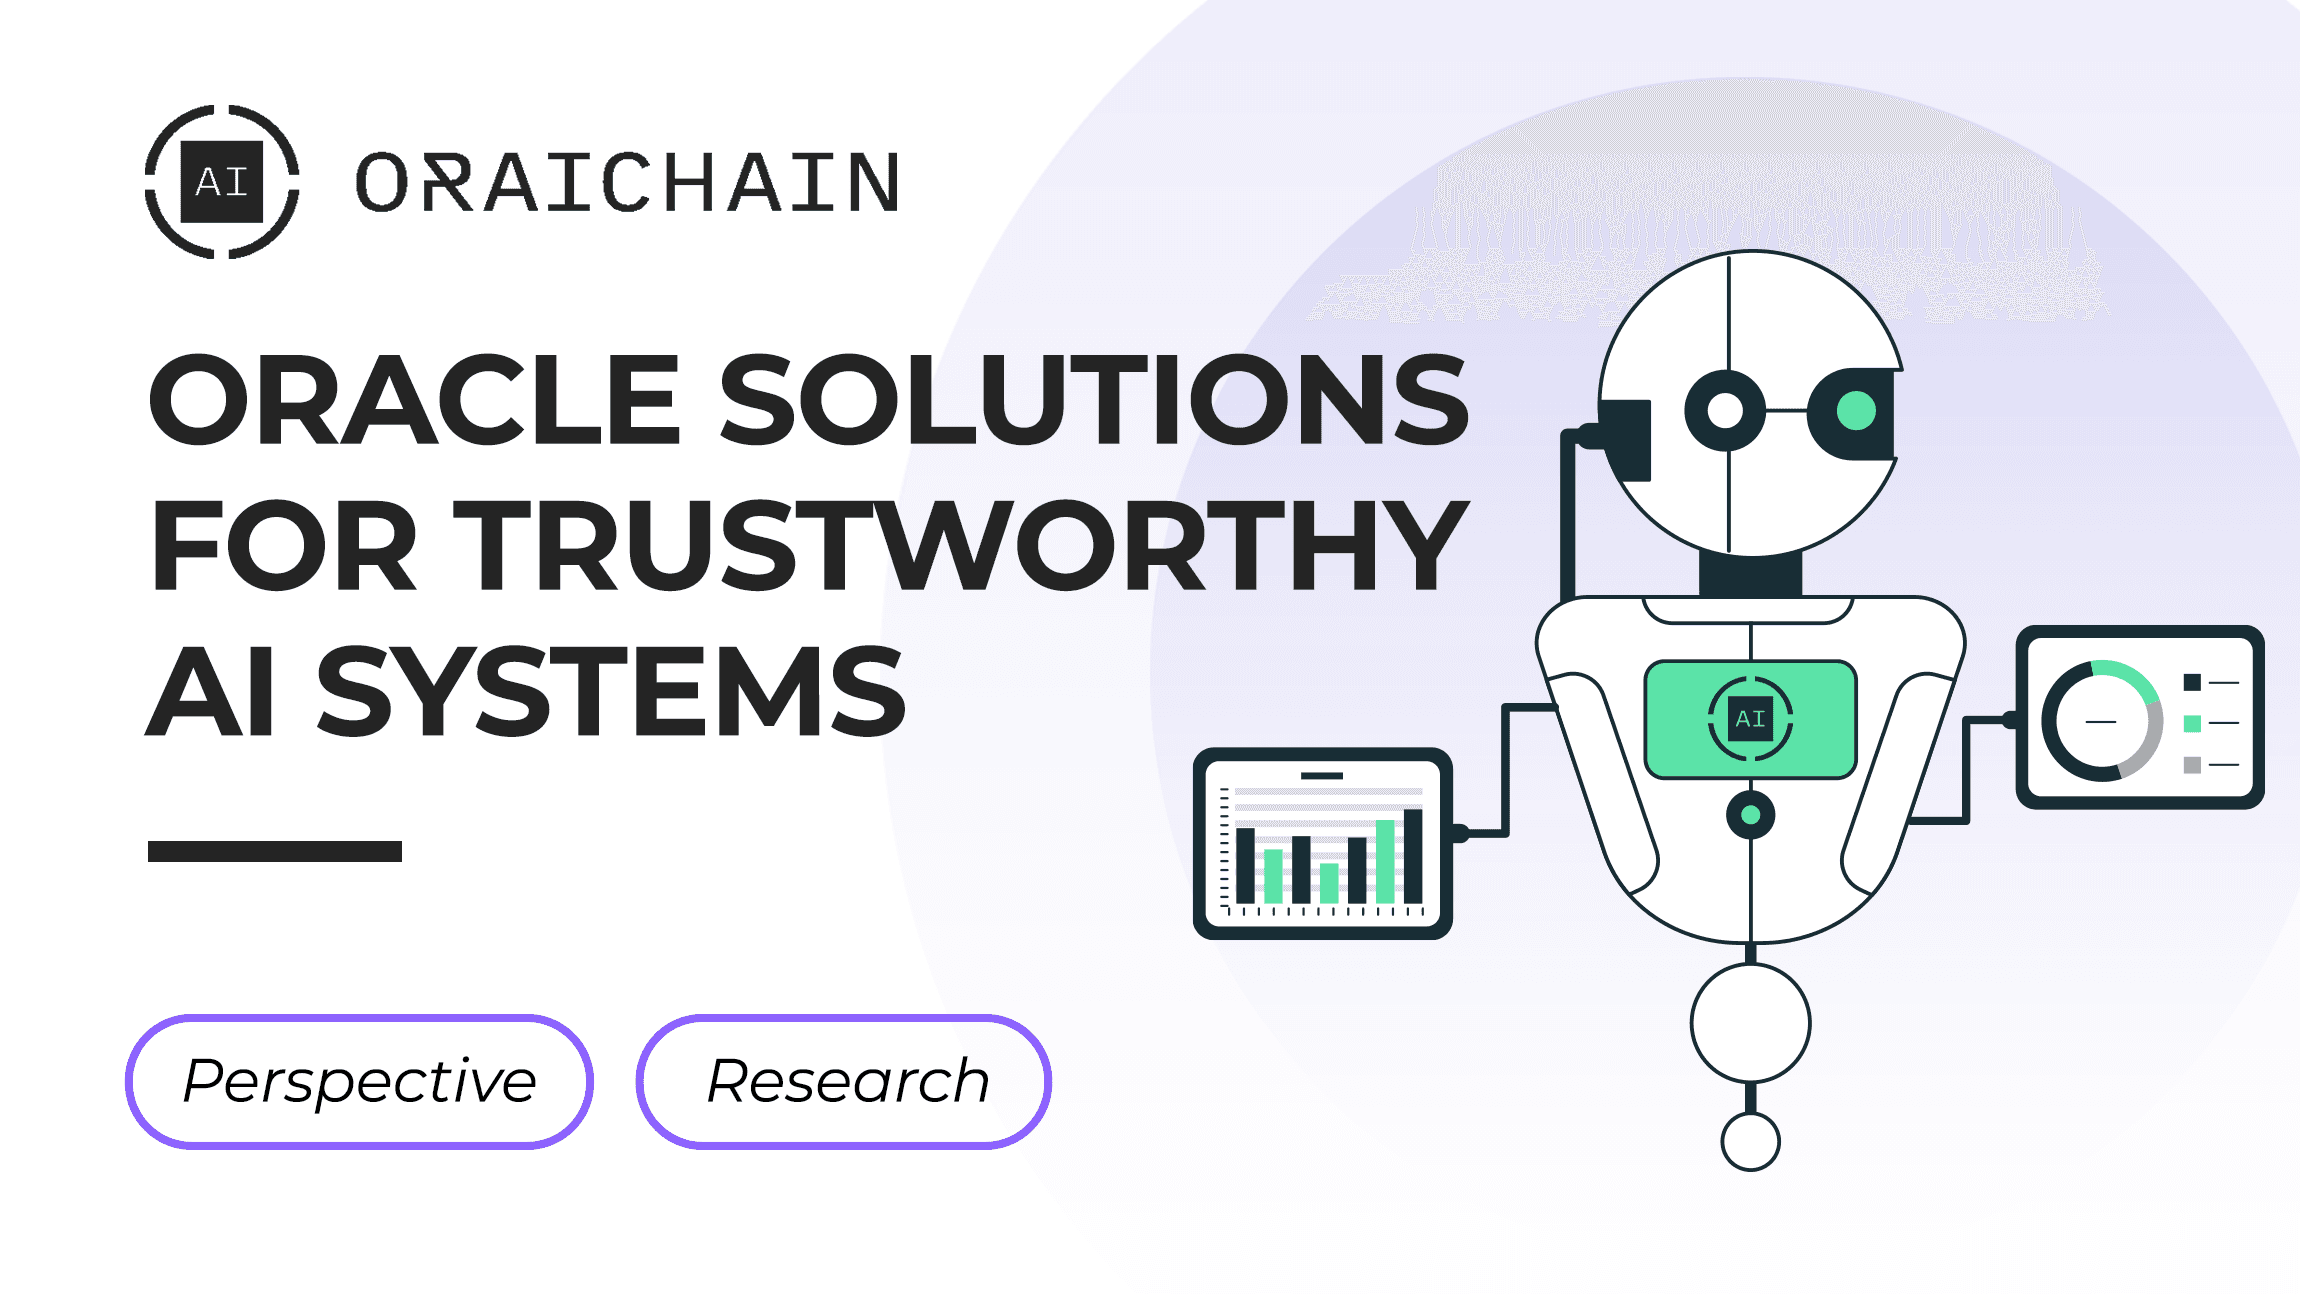 Oracle Solutions for Trustworthy AI Systems